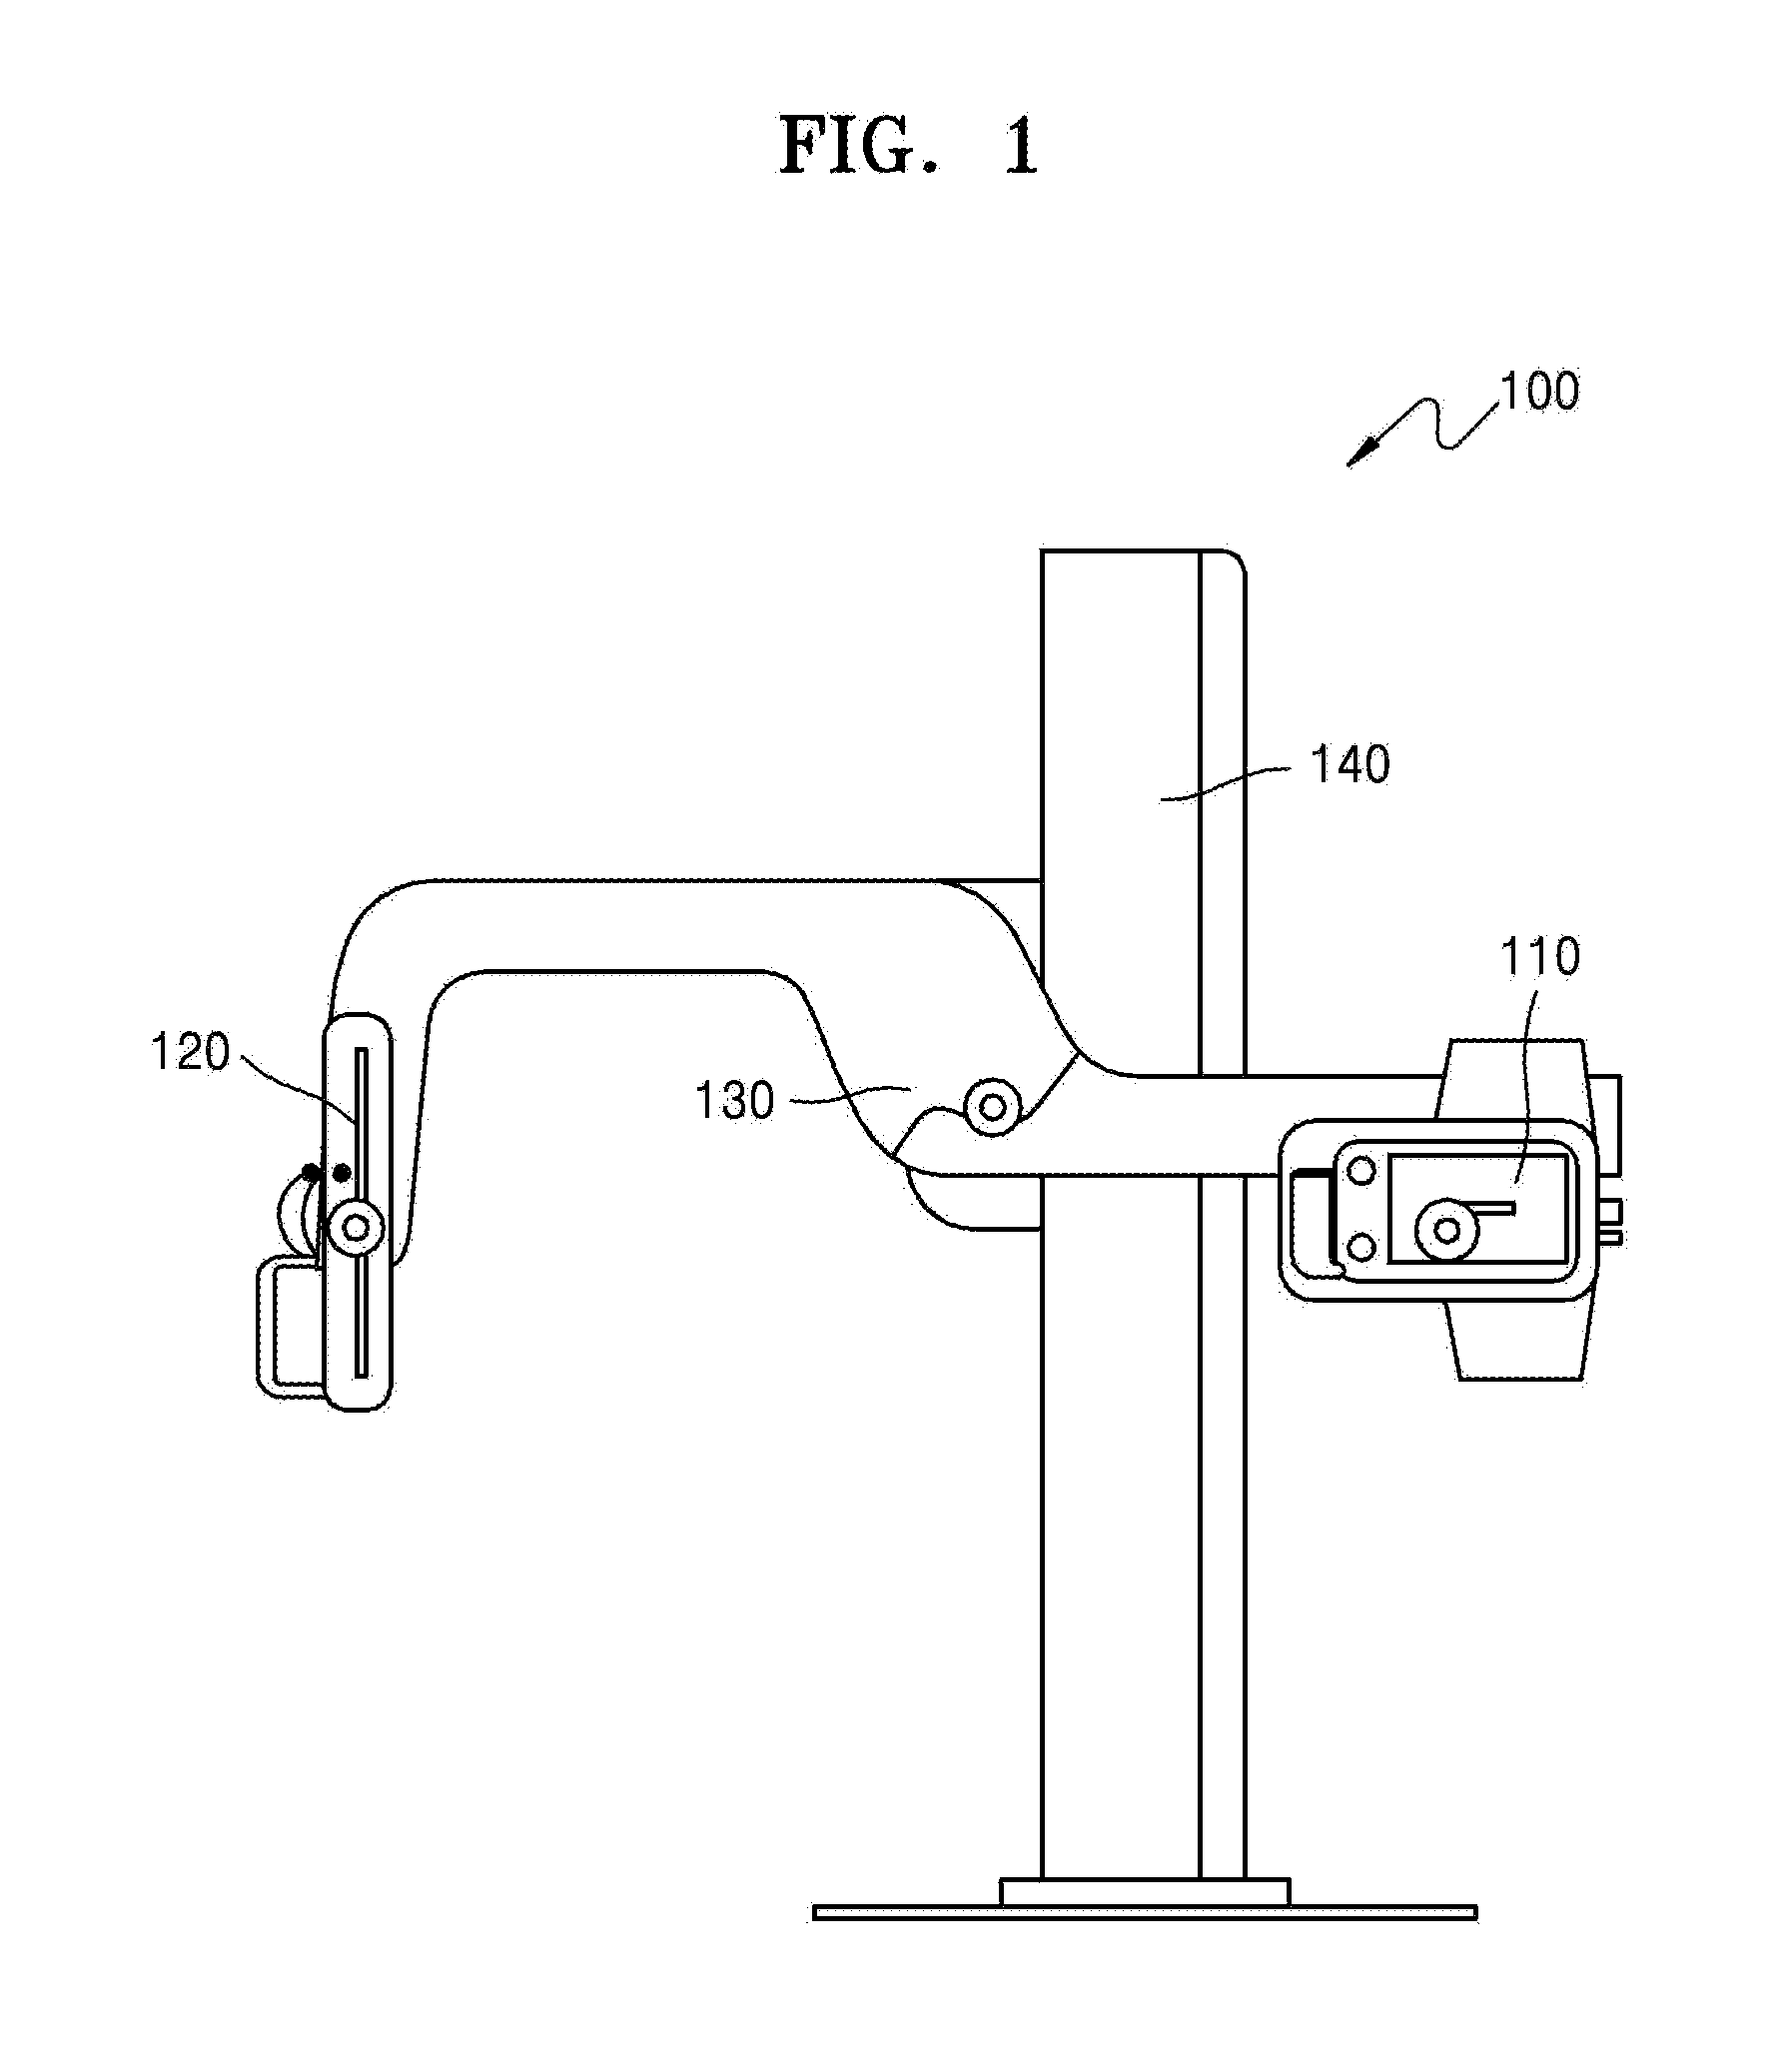 X-ray apparatus and method of capturing x-ray image